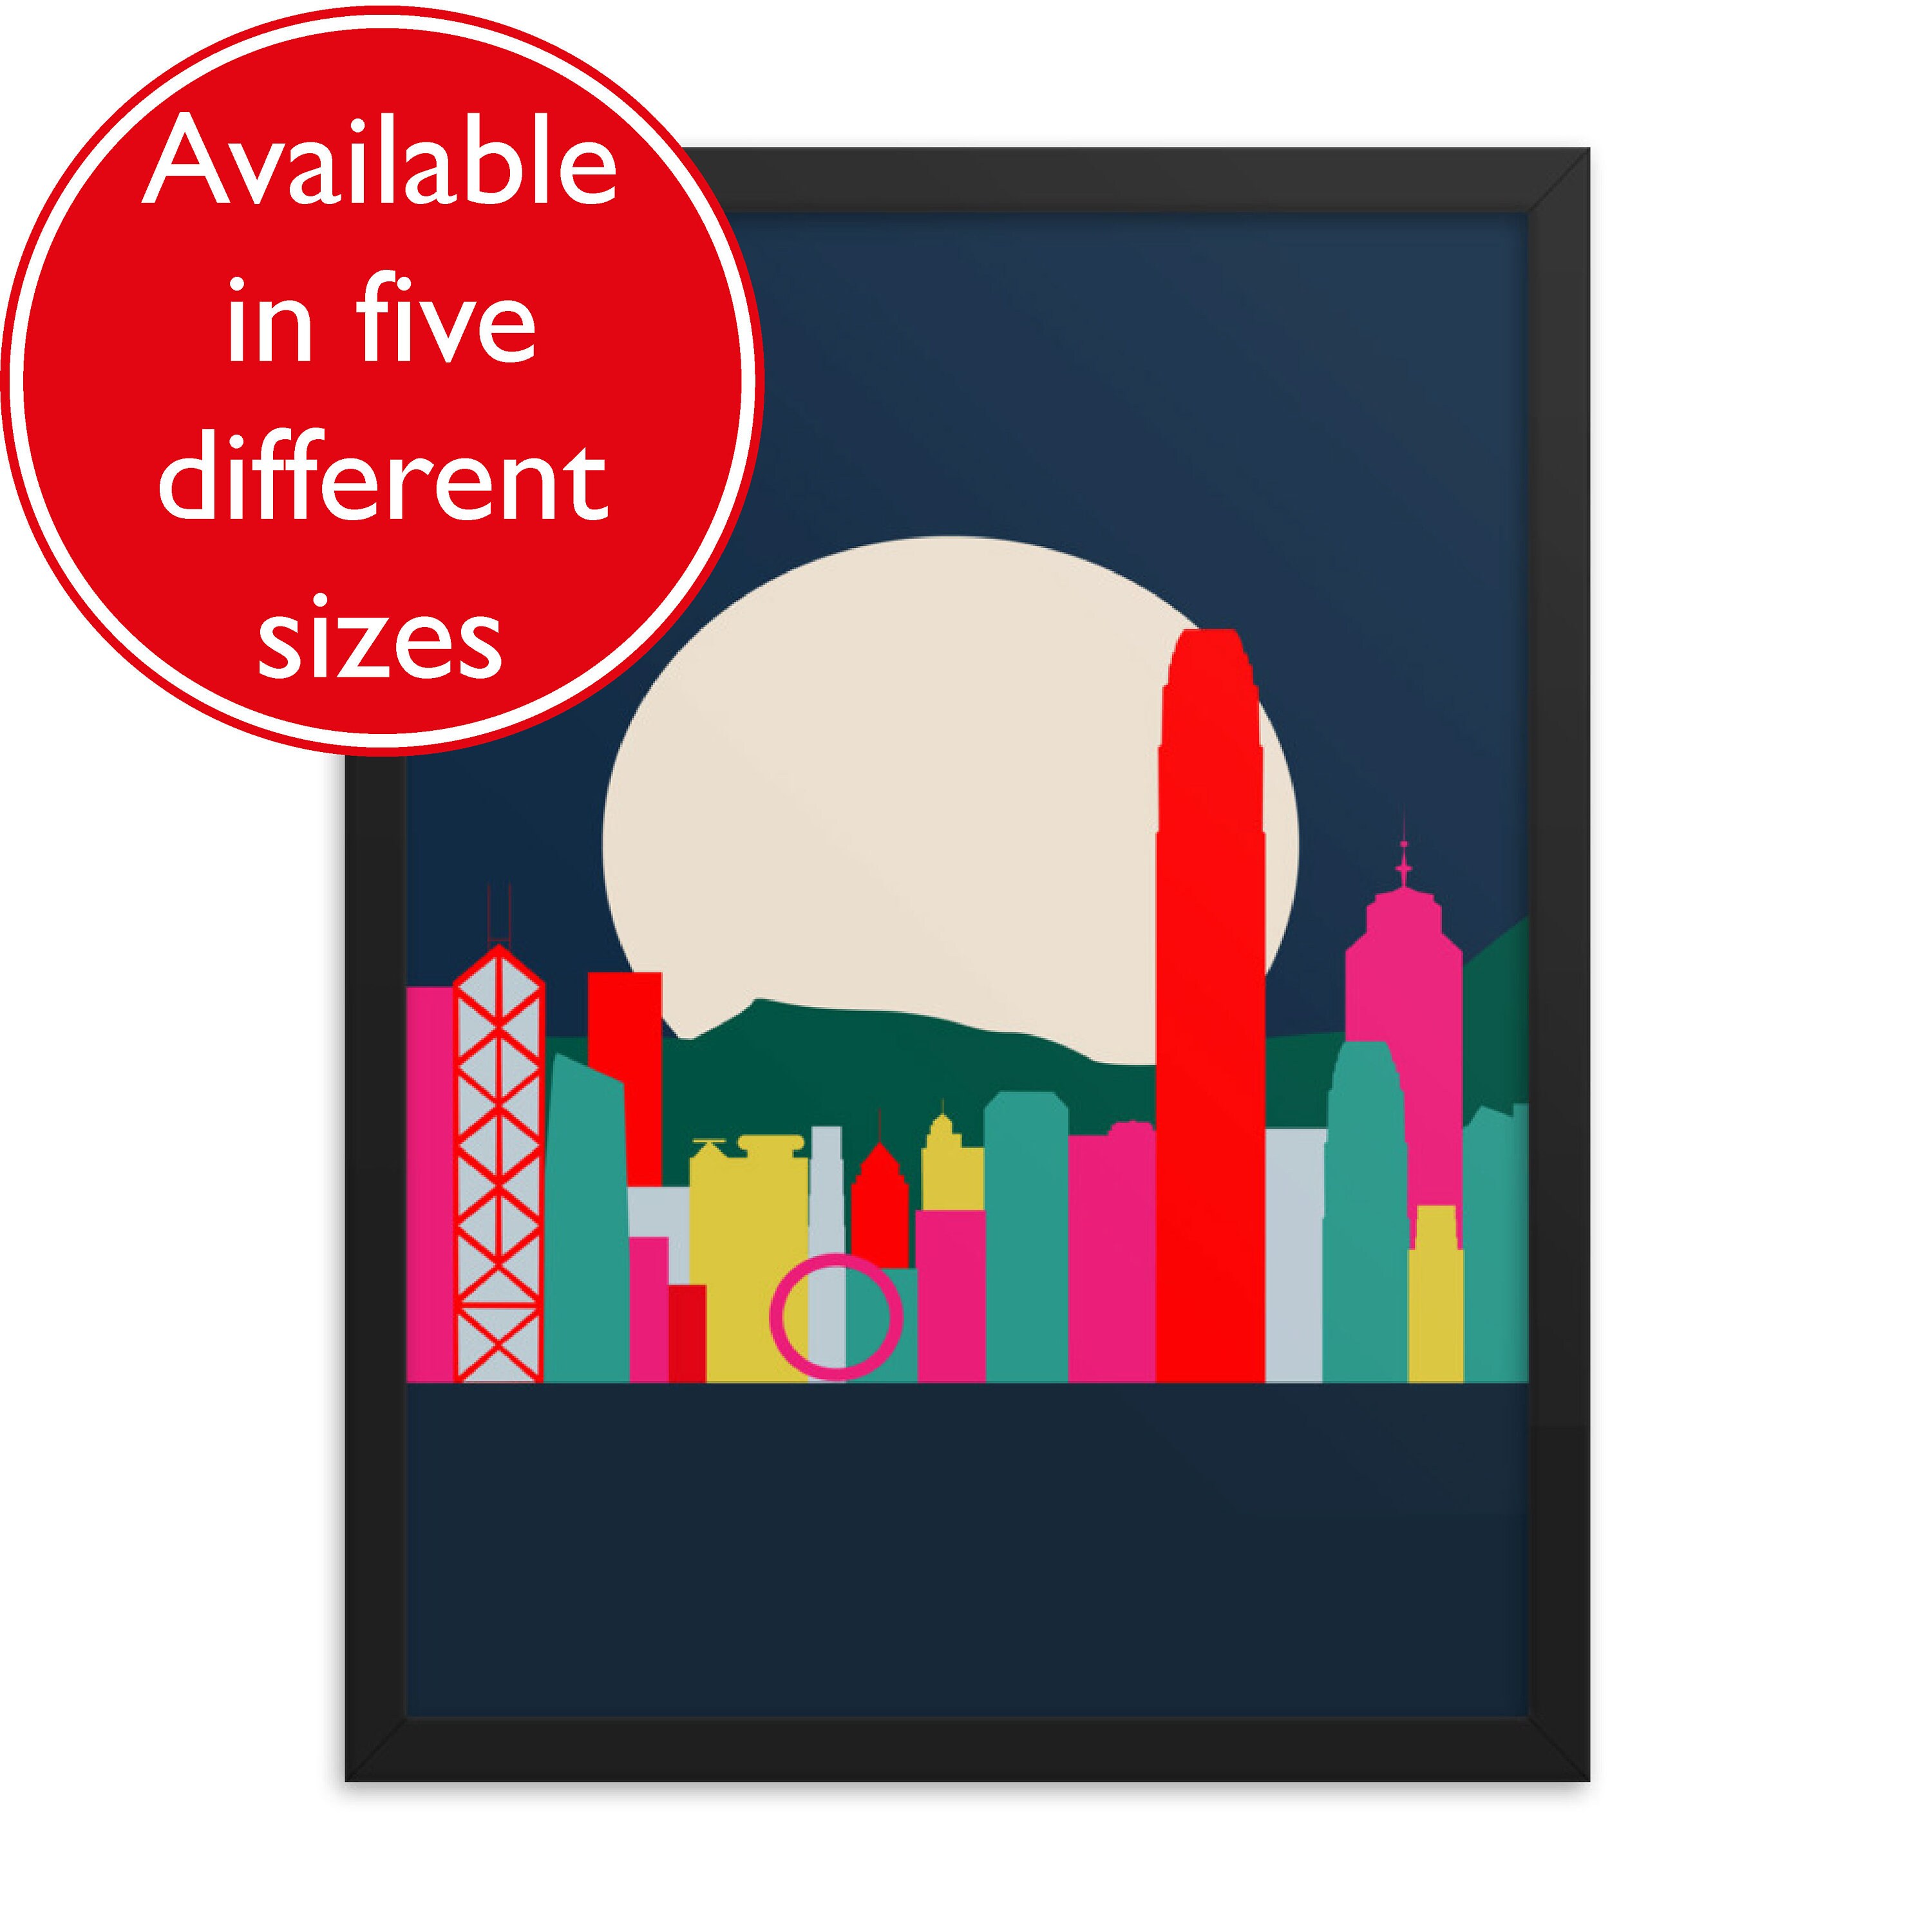 ANY 5 POSTER PACK, Digital Art, Poster, Print, A5 A4, A3, A2